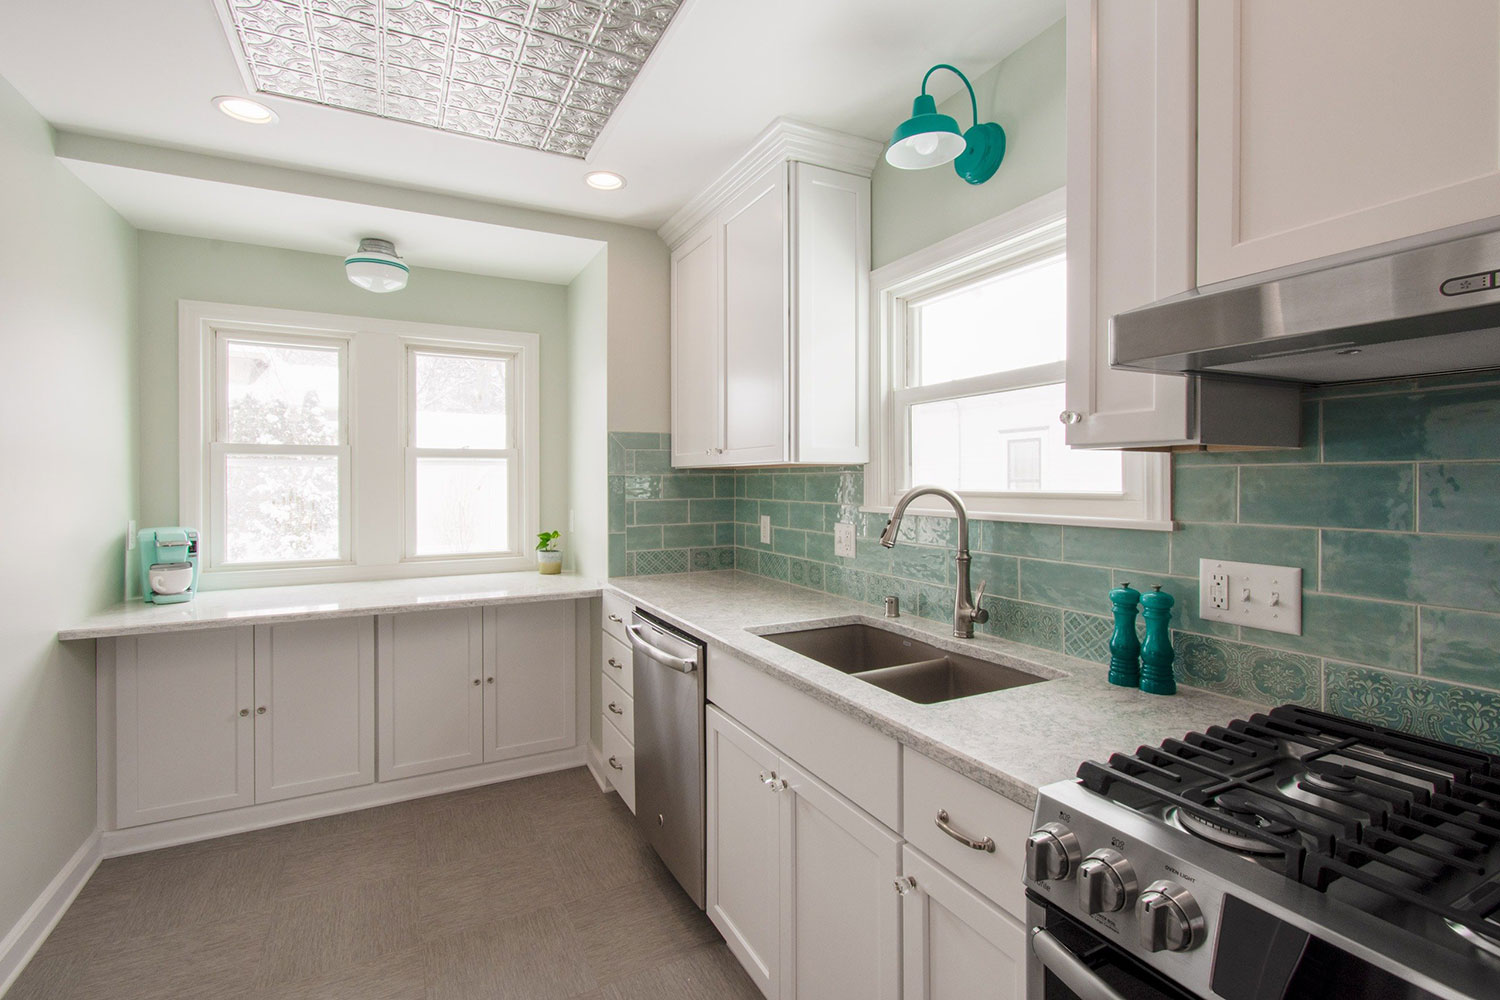 Wauwatosa kitchen with teal subway tile backsplash and a tin ceiling